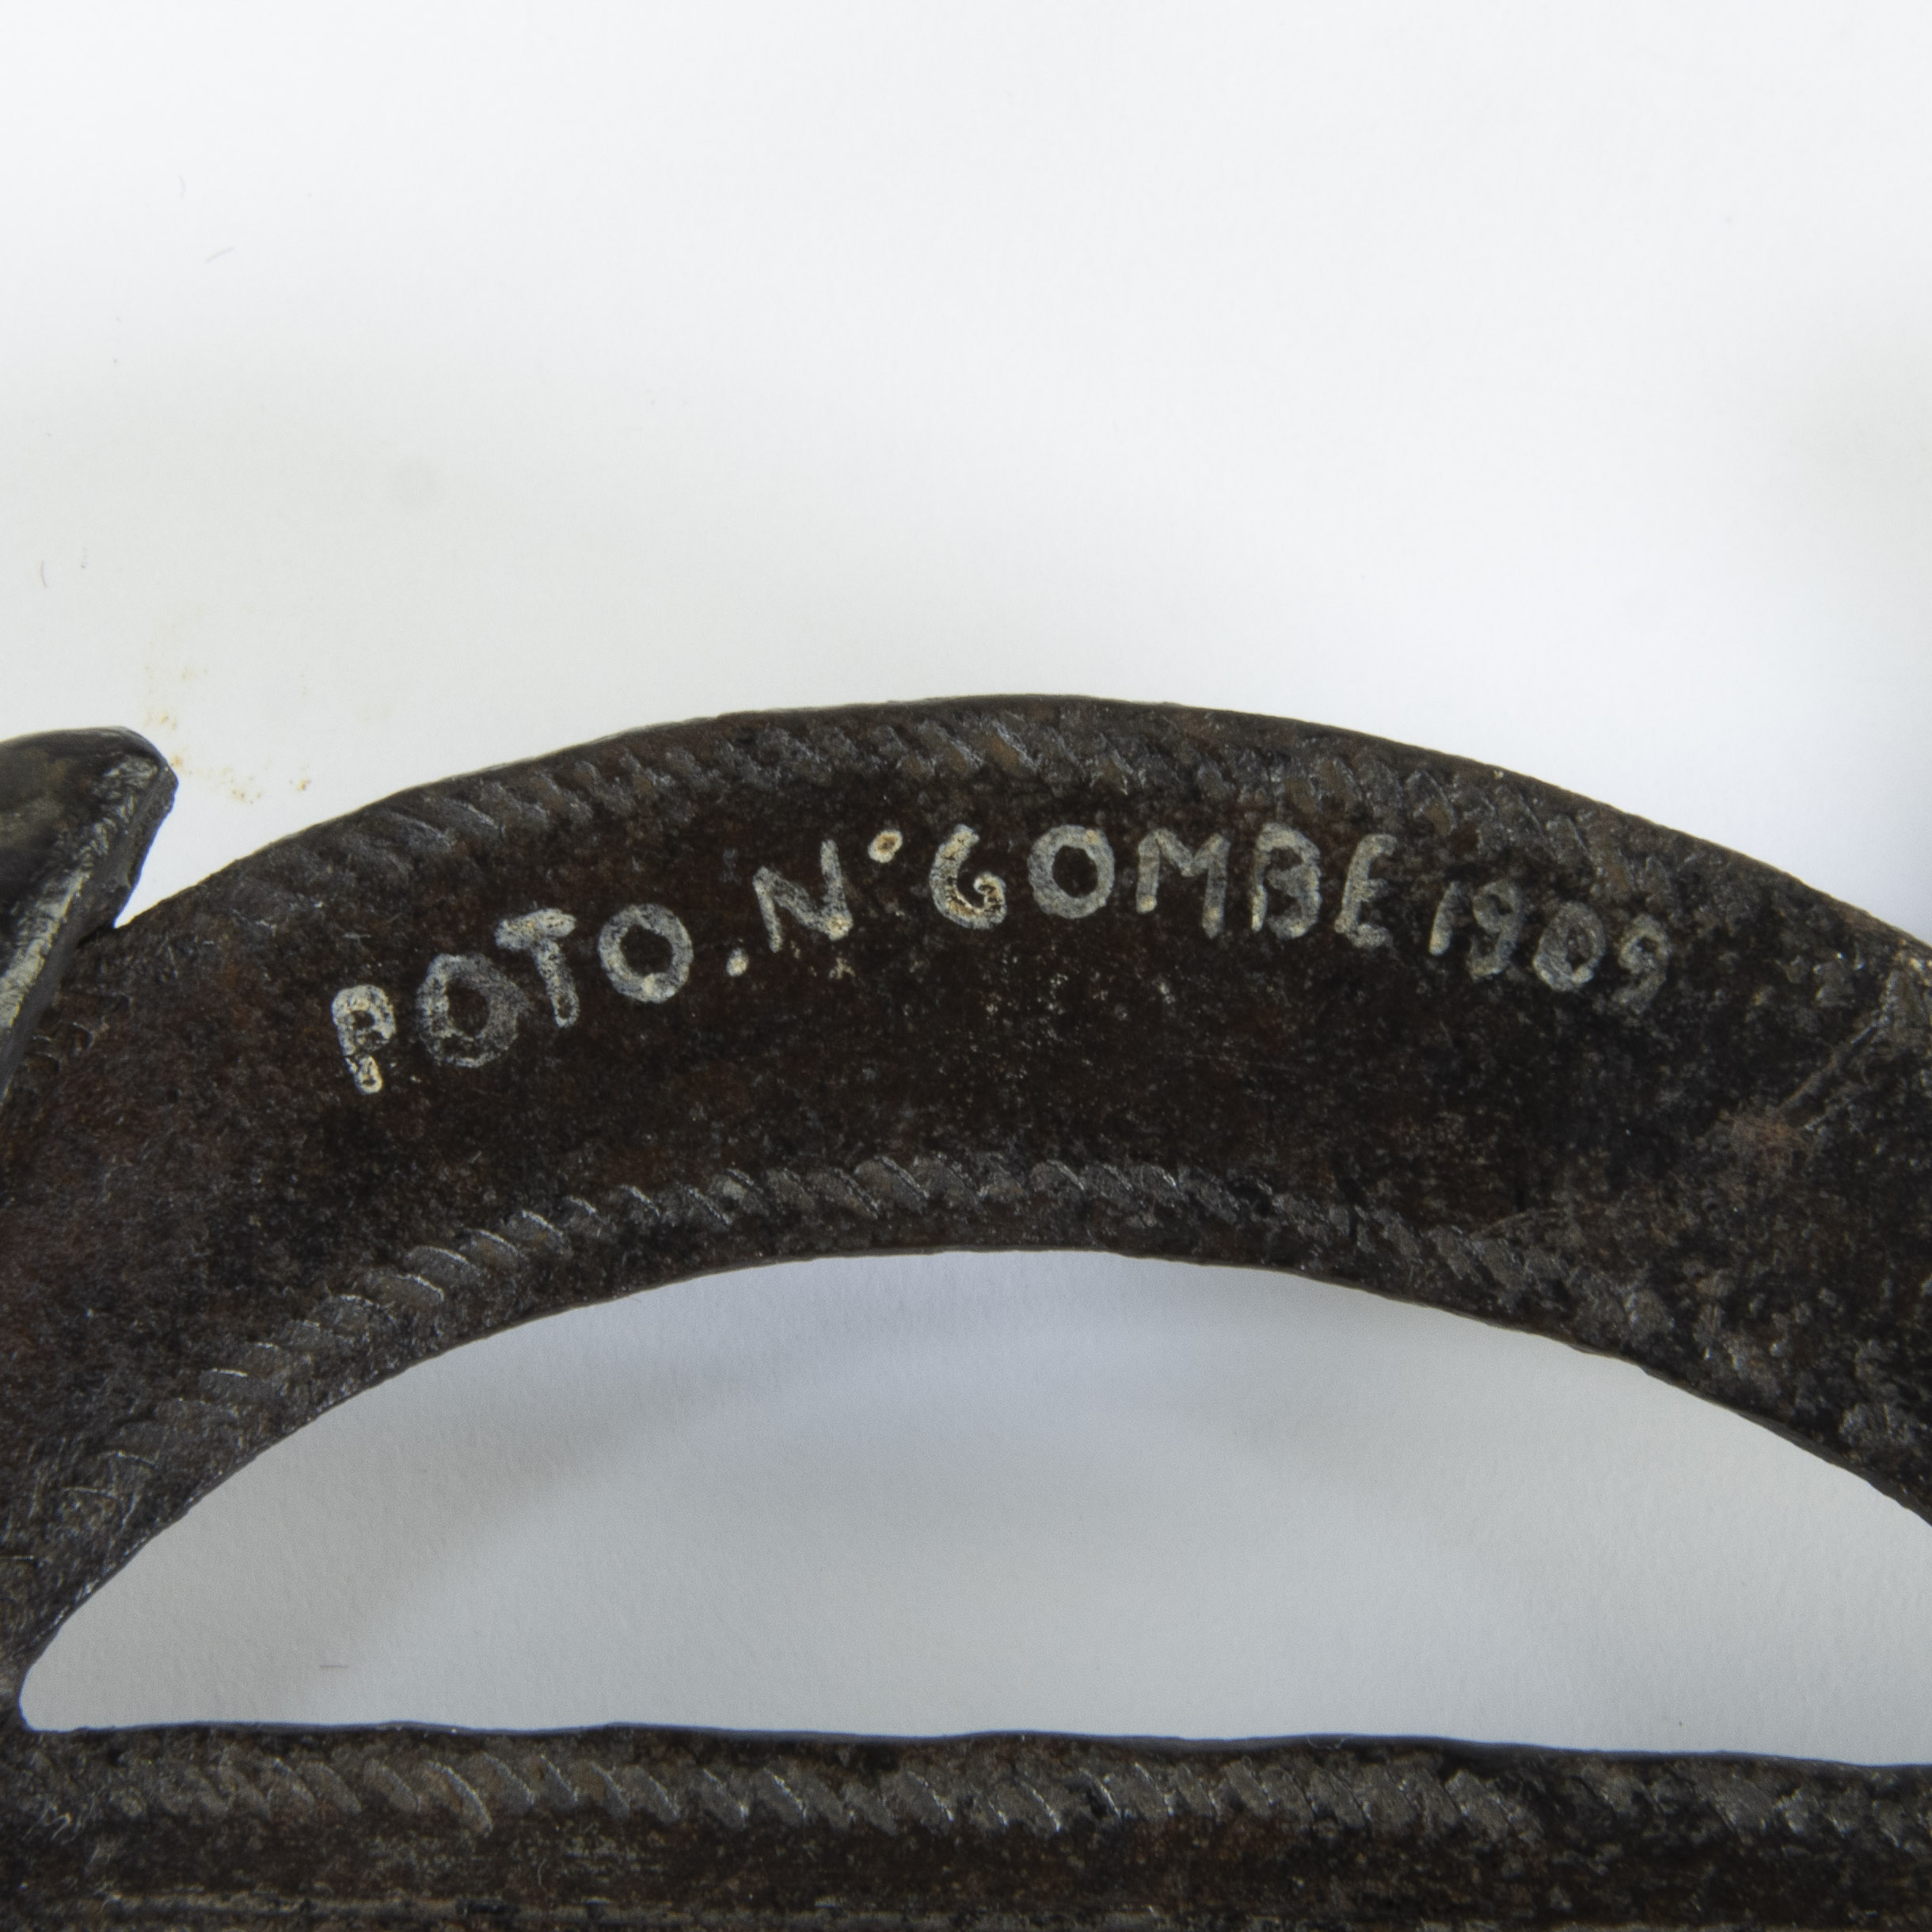 African Ngombe or Poto sword, marked 1909 - Image 3 of 3